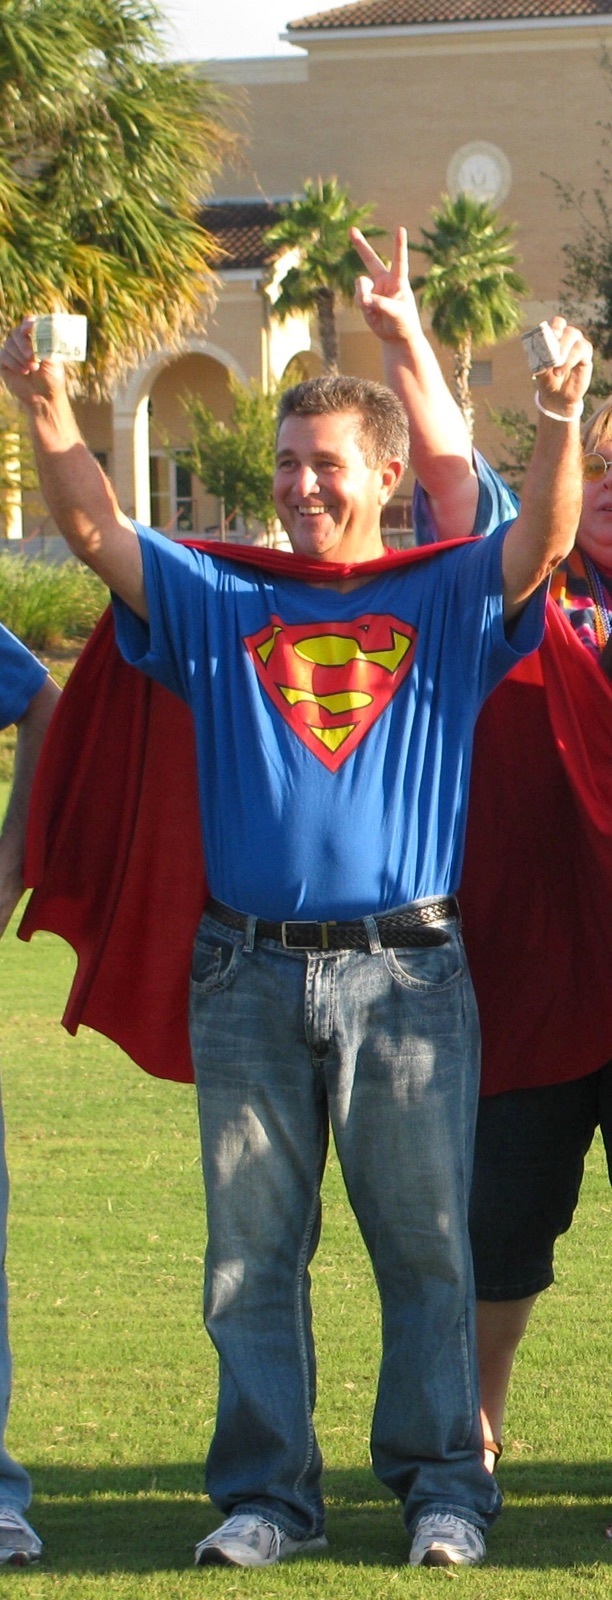 Casey Ryan wrote this via email to describe her father: “Superman. Game changer. Community builder. Visionary. Eagle Scout. Father and husband. A Godly man of high character, generosity and selfishness.”